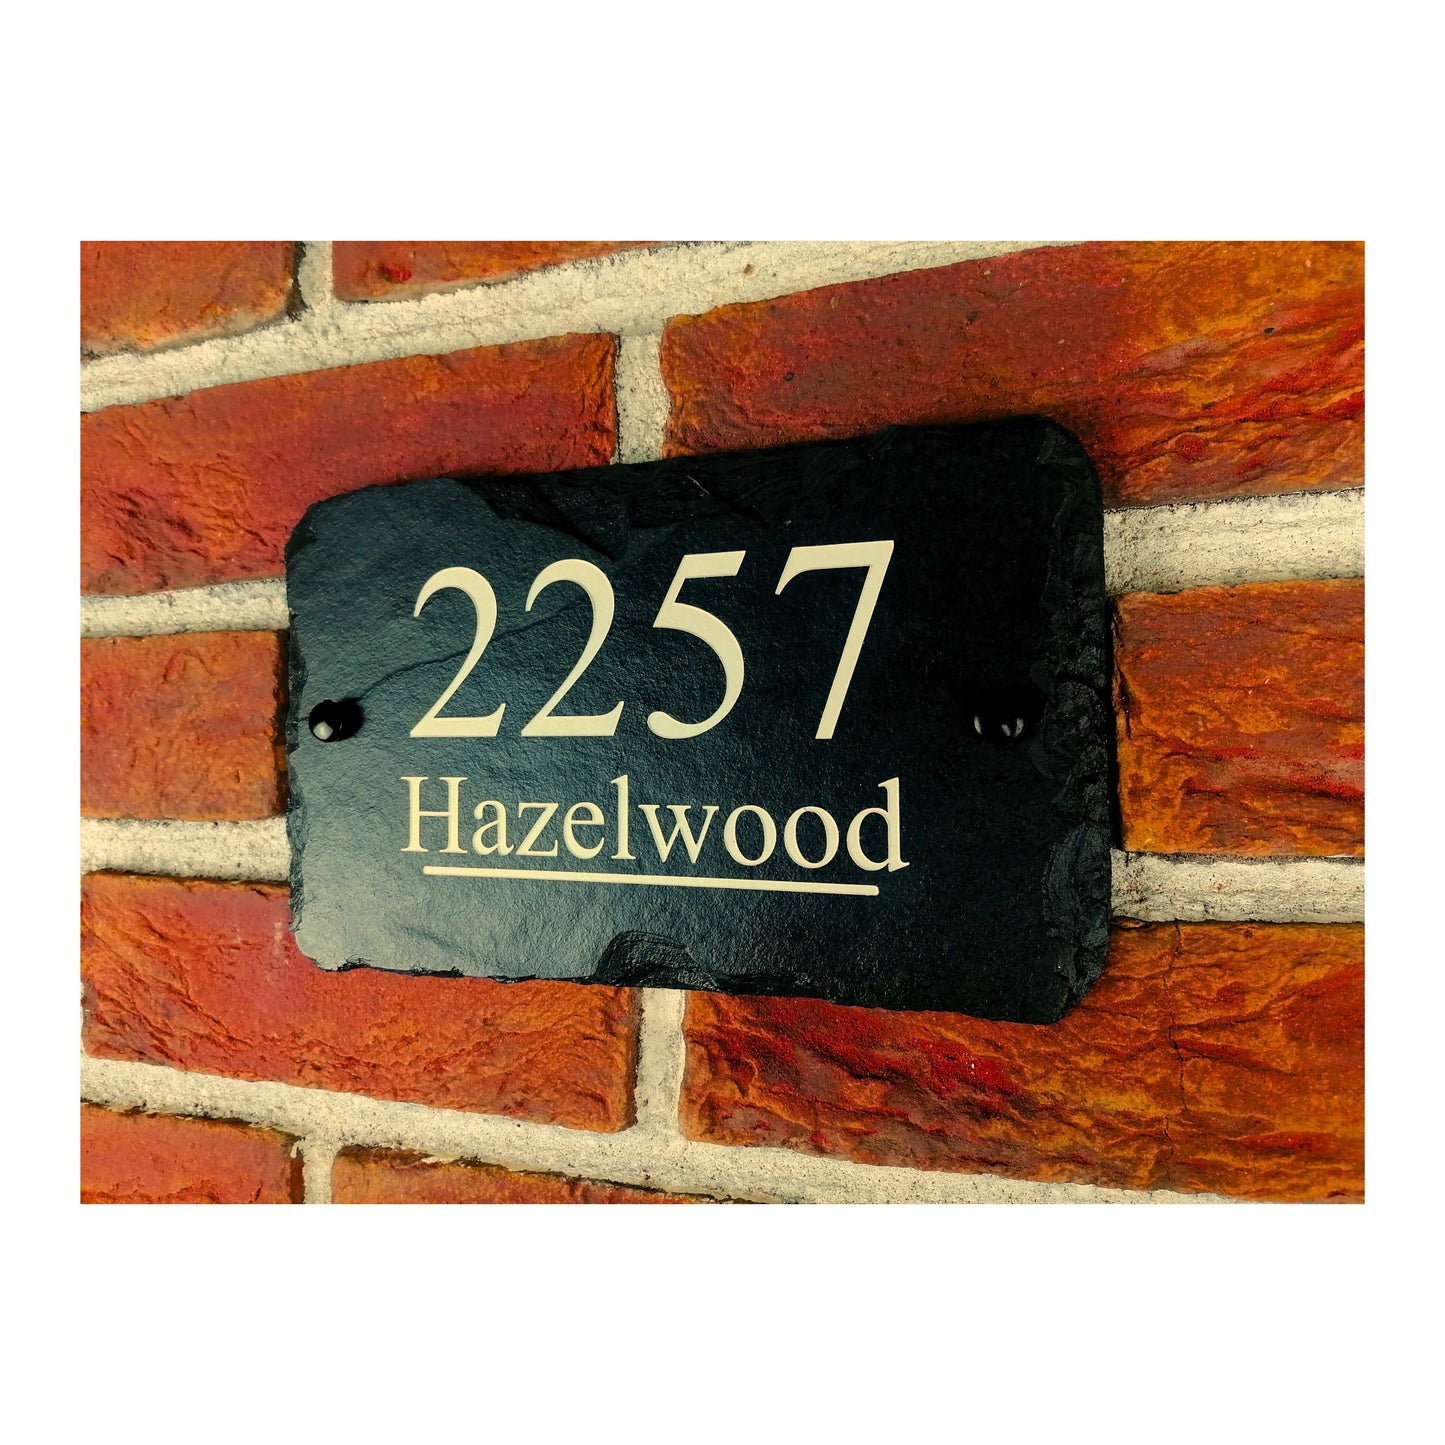 Engraved Natural Slate House Address Sign - Rustic Farmhouse Style Door Number - Wedding, Housewarming, Anniversary Gift Idea